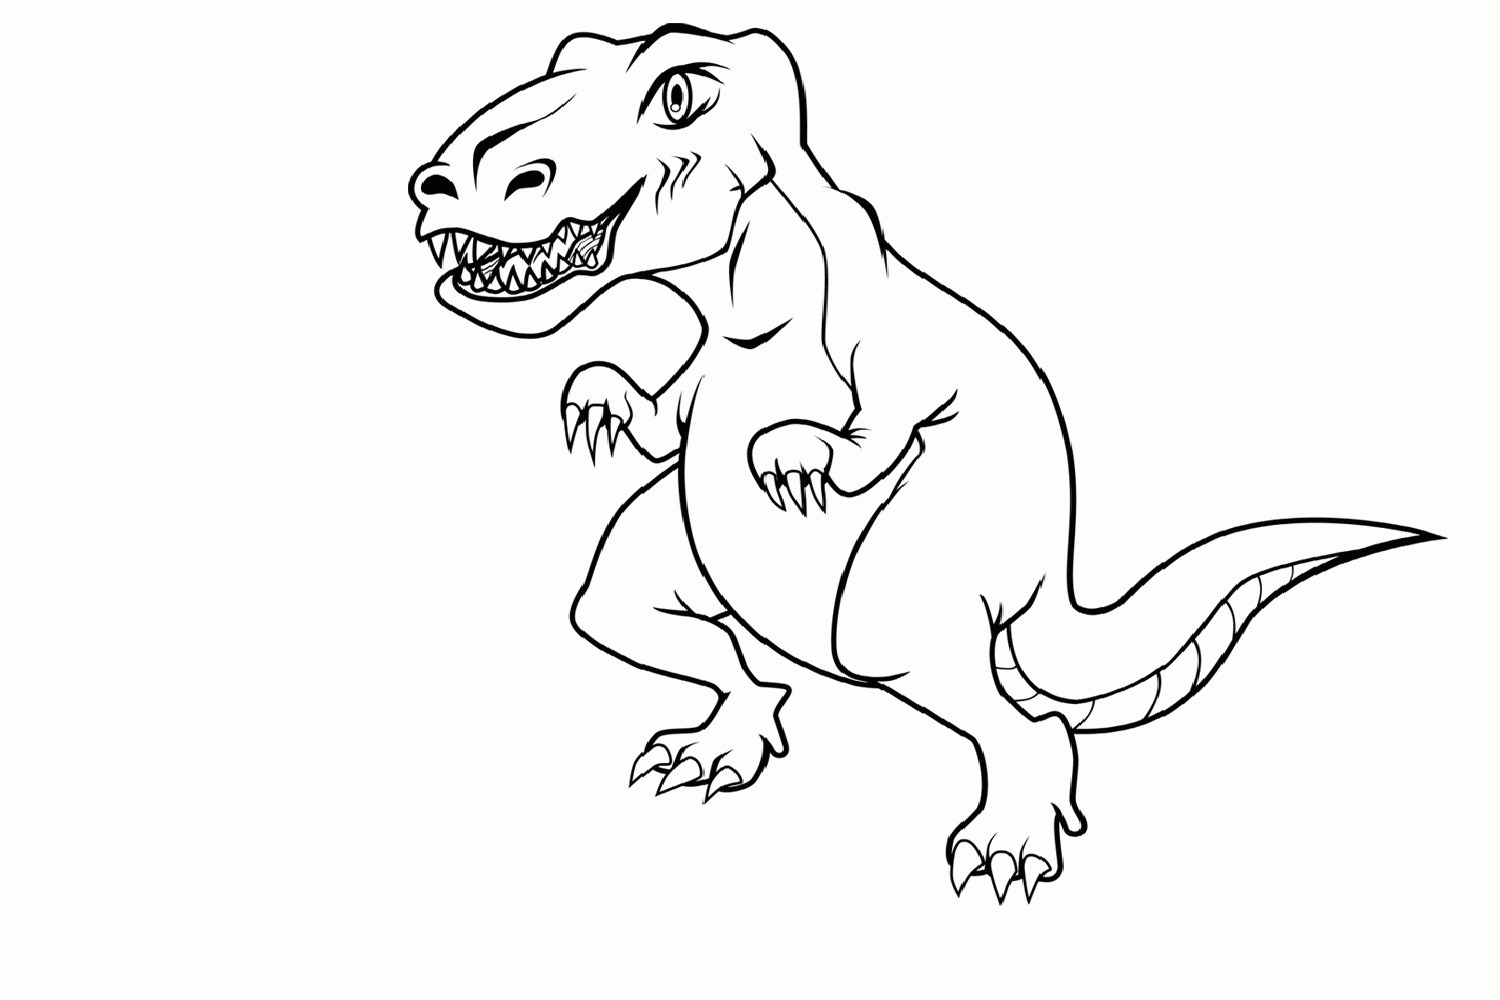 35-printable-dinosaur-coloring-pages-pdf-background-colorist